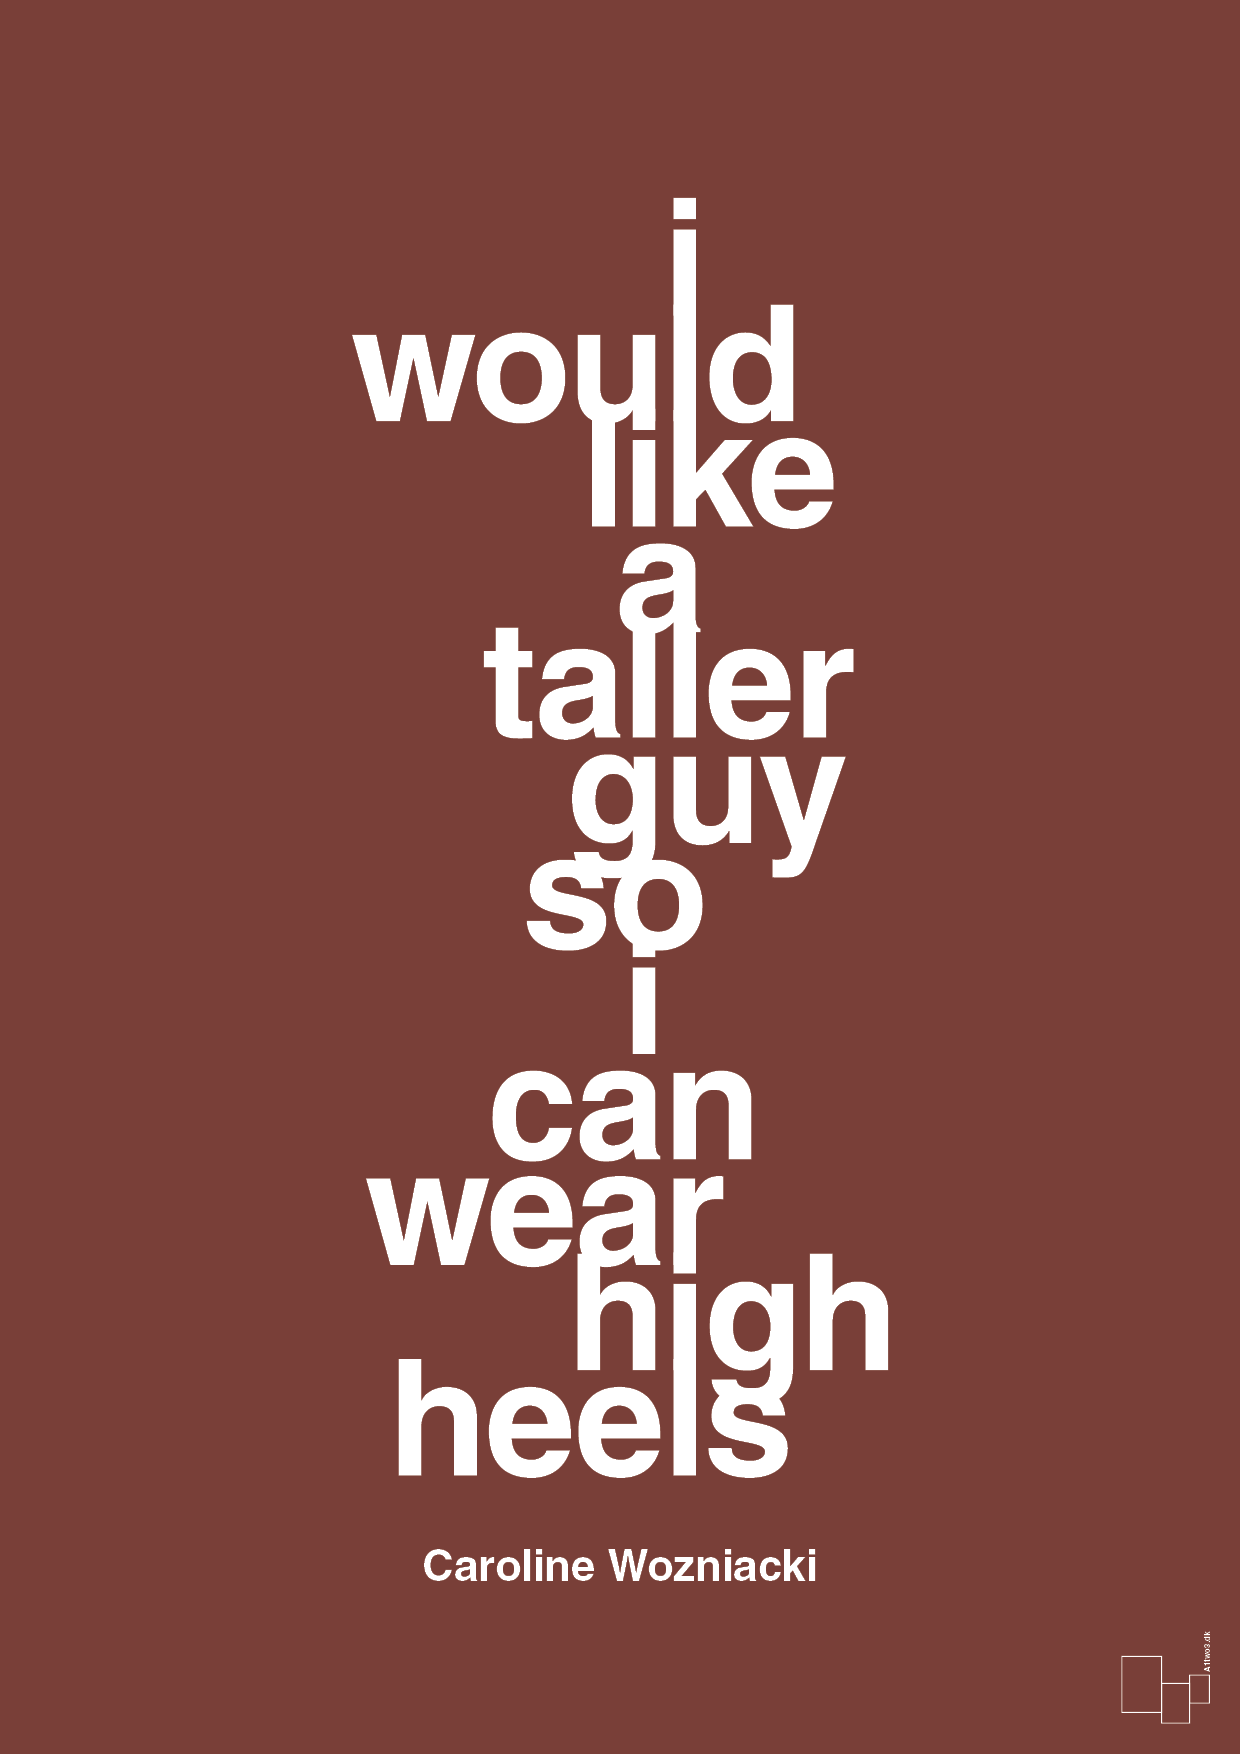 i would like a taller guy so i can wear high heels - Plakat med Citater i Red Pepper